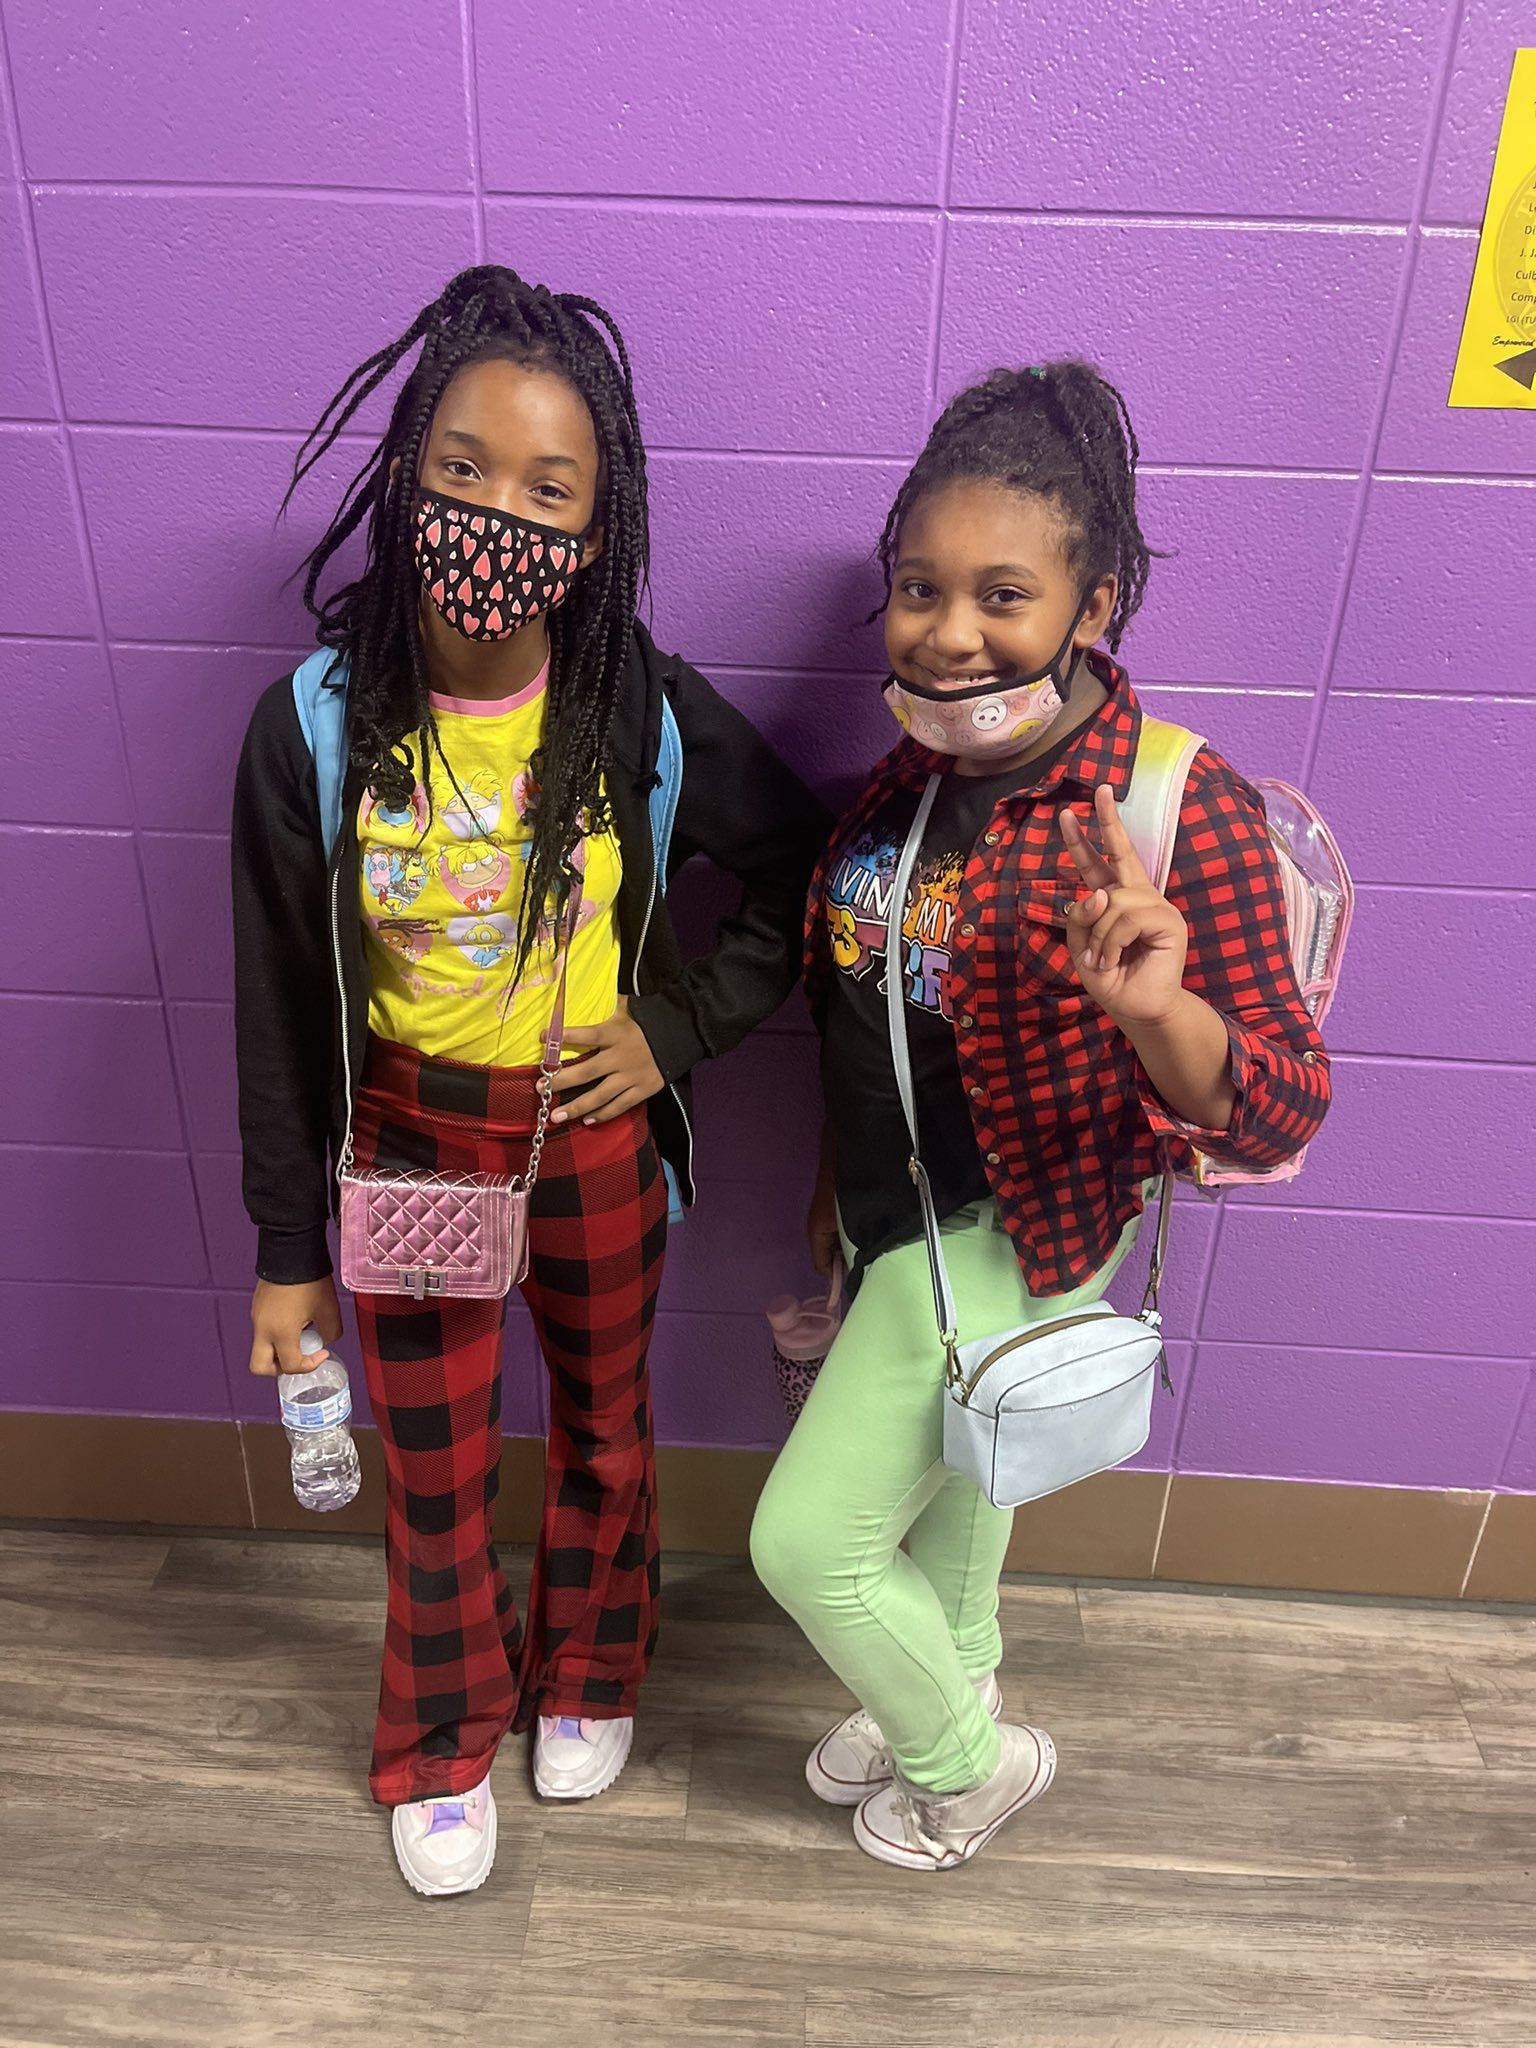 Twin Creeks MS on Twitter: "Our Warriors are committed to not getting mixed up in drugs. Check out the creative mix match https://t.co/UutcRsm9Jk" /